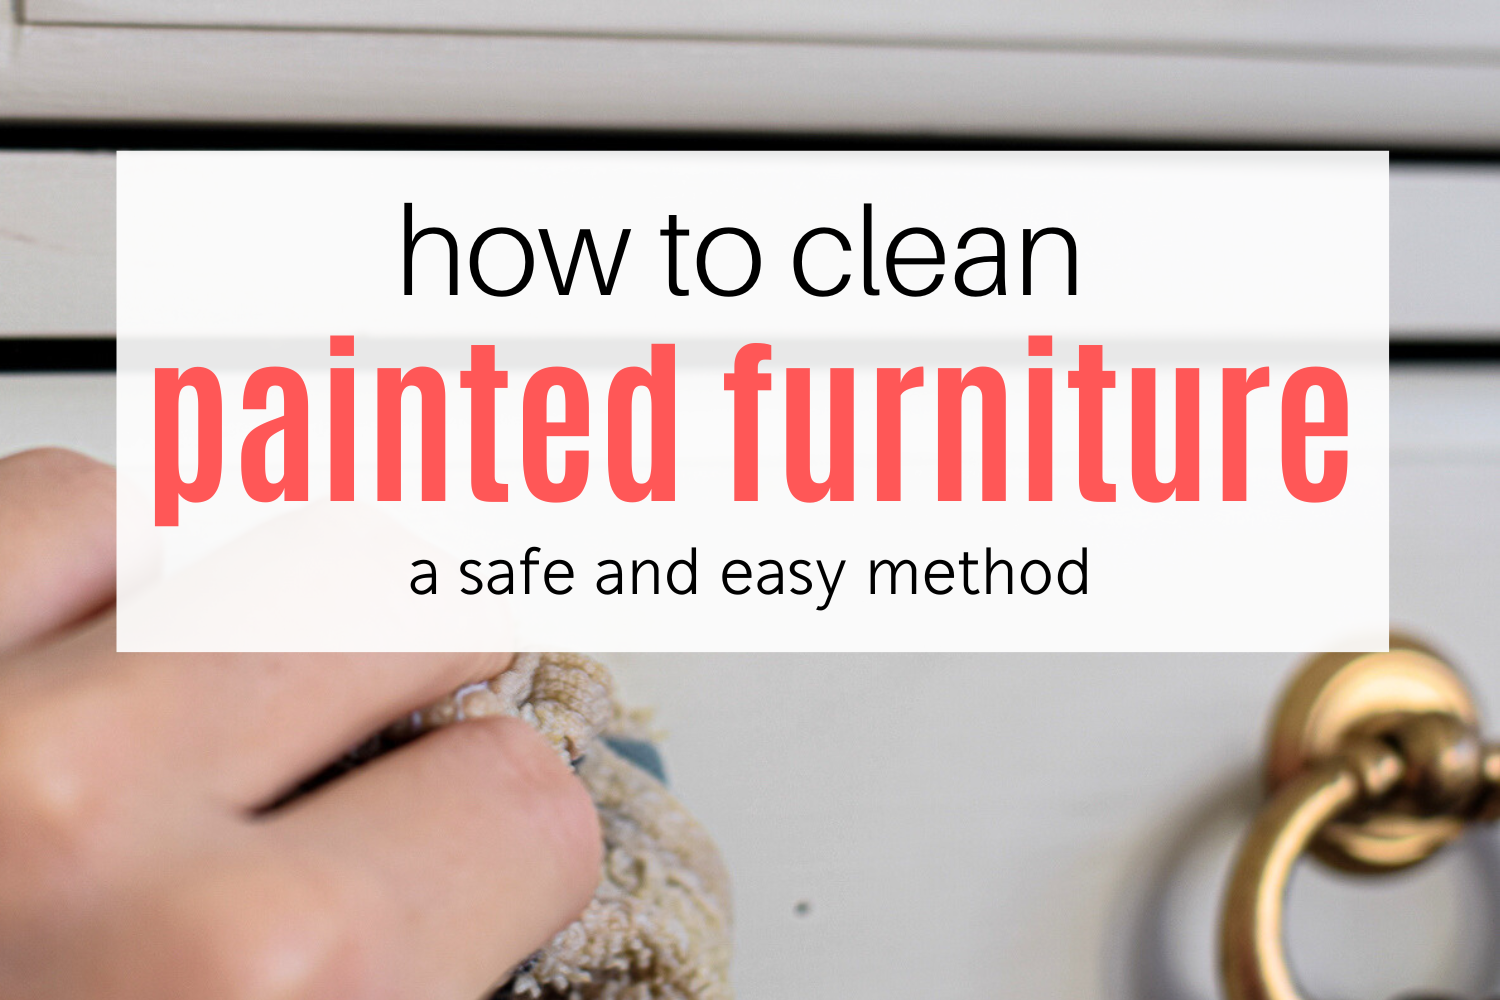 How to Clean Painted Furniture the Safe and Simple Way